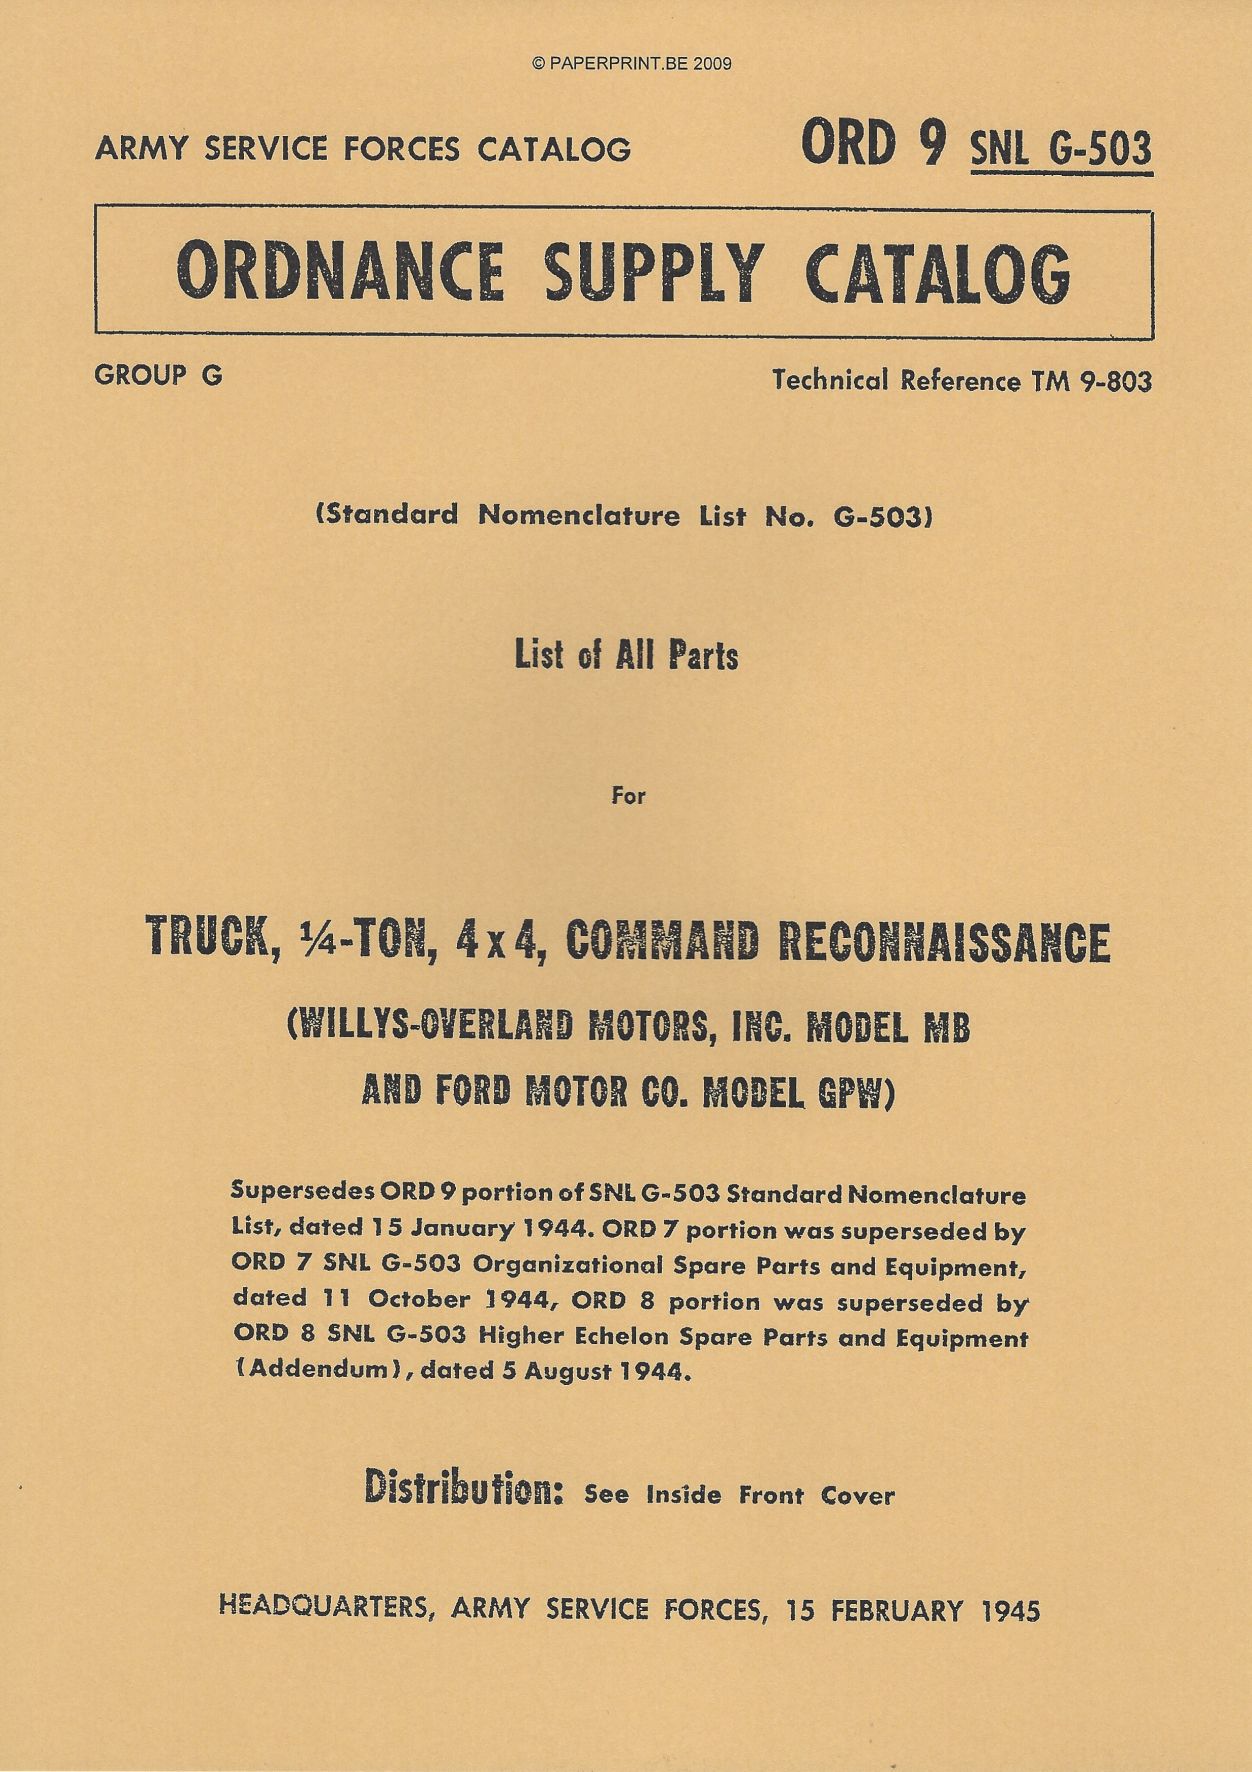 SNL G-503 US LIST OF ALL PARTS FOR TRUCK, ¼ - TON, 4x4, COMMAND RECONNAISSANCE  (WILLYS-OVERLAND MOTORS, INC. MODEL MB AND FORD